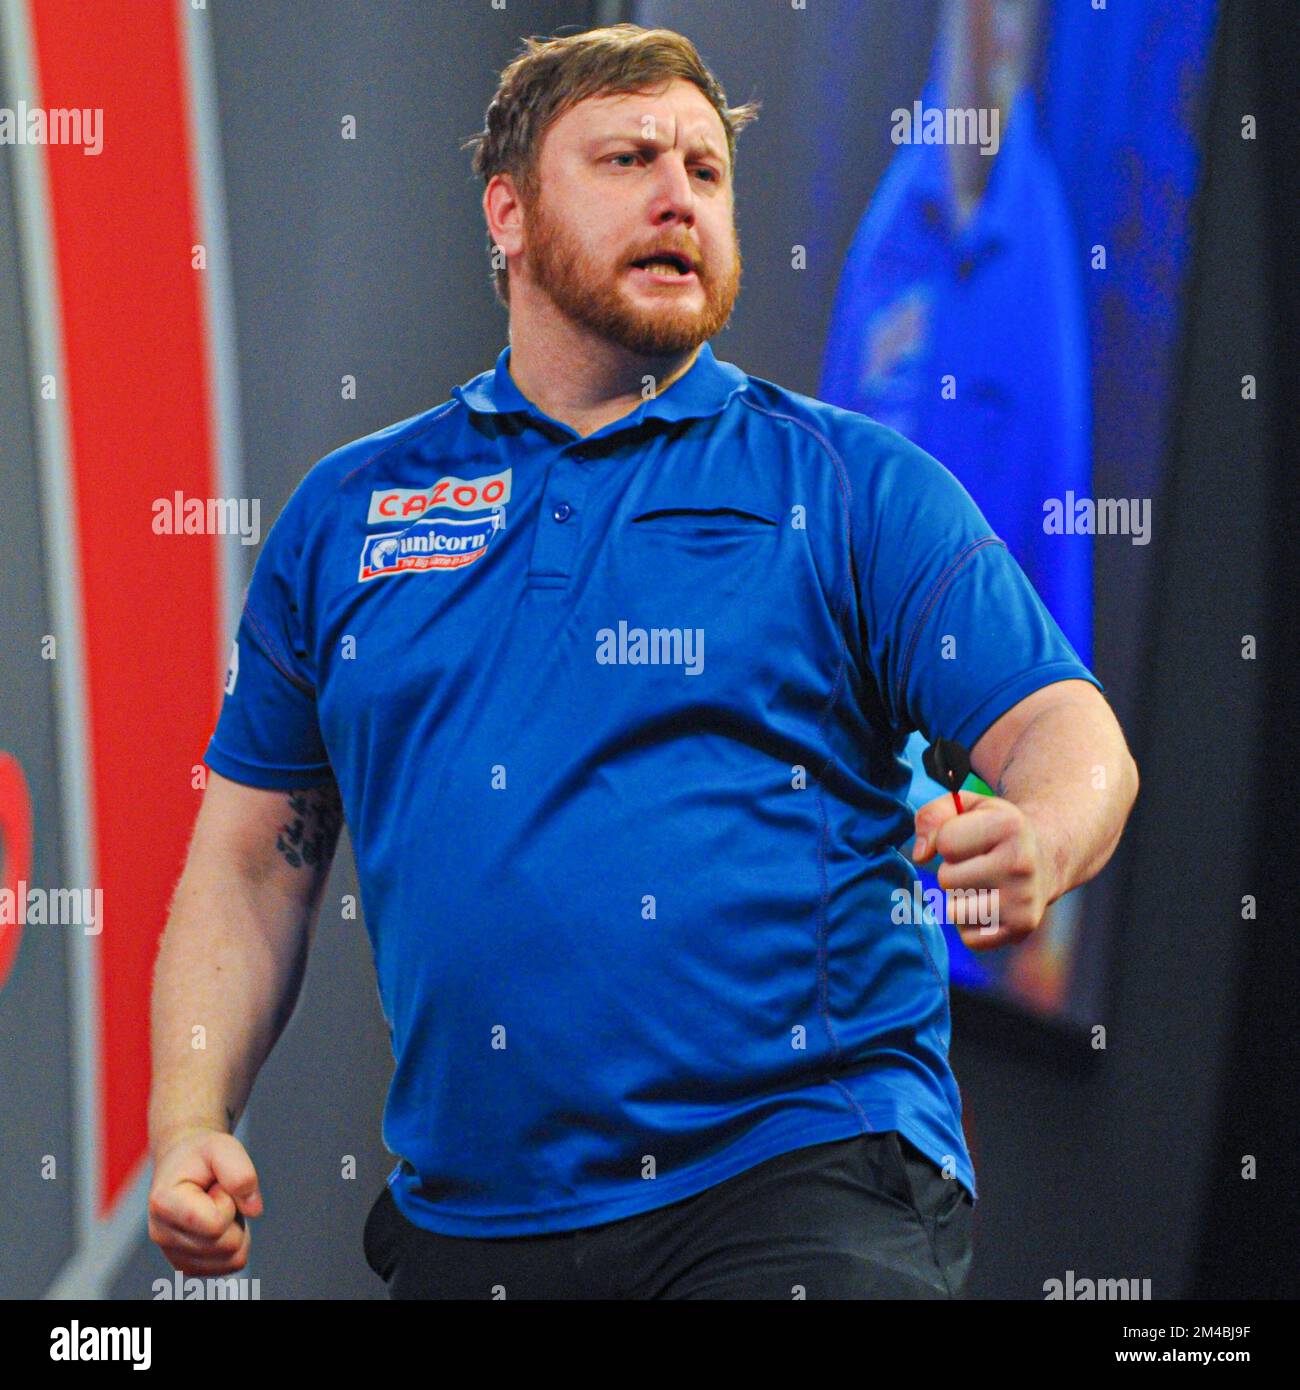 LONDON, UNITED KINGDOM - DECEMBER 17: Cameron Menzies of Scotland reacts  during his First Round match at the 2022/23 Cazoo World Darts Championship  at Alexandra Palace on December 17, 2022 in London,